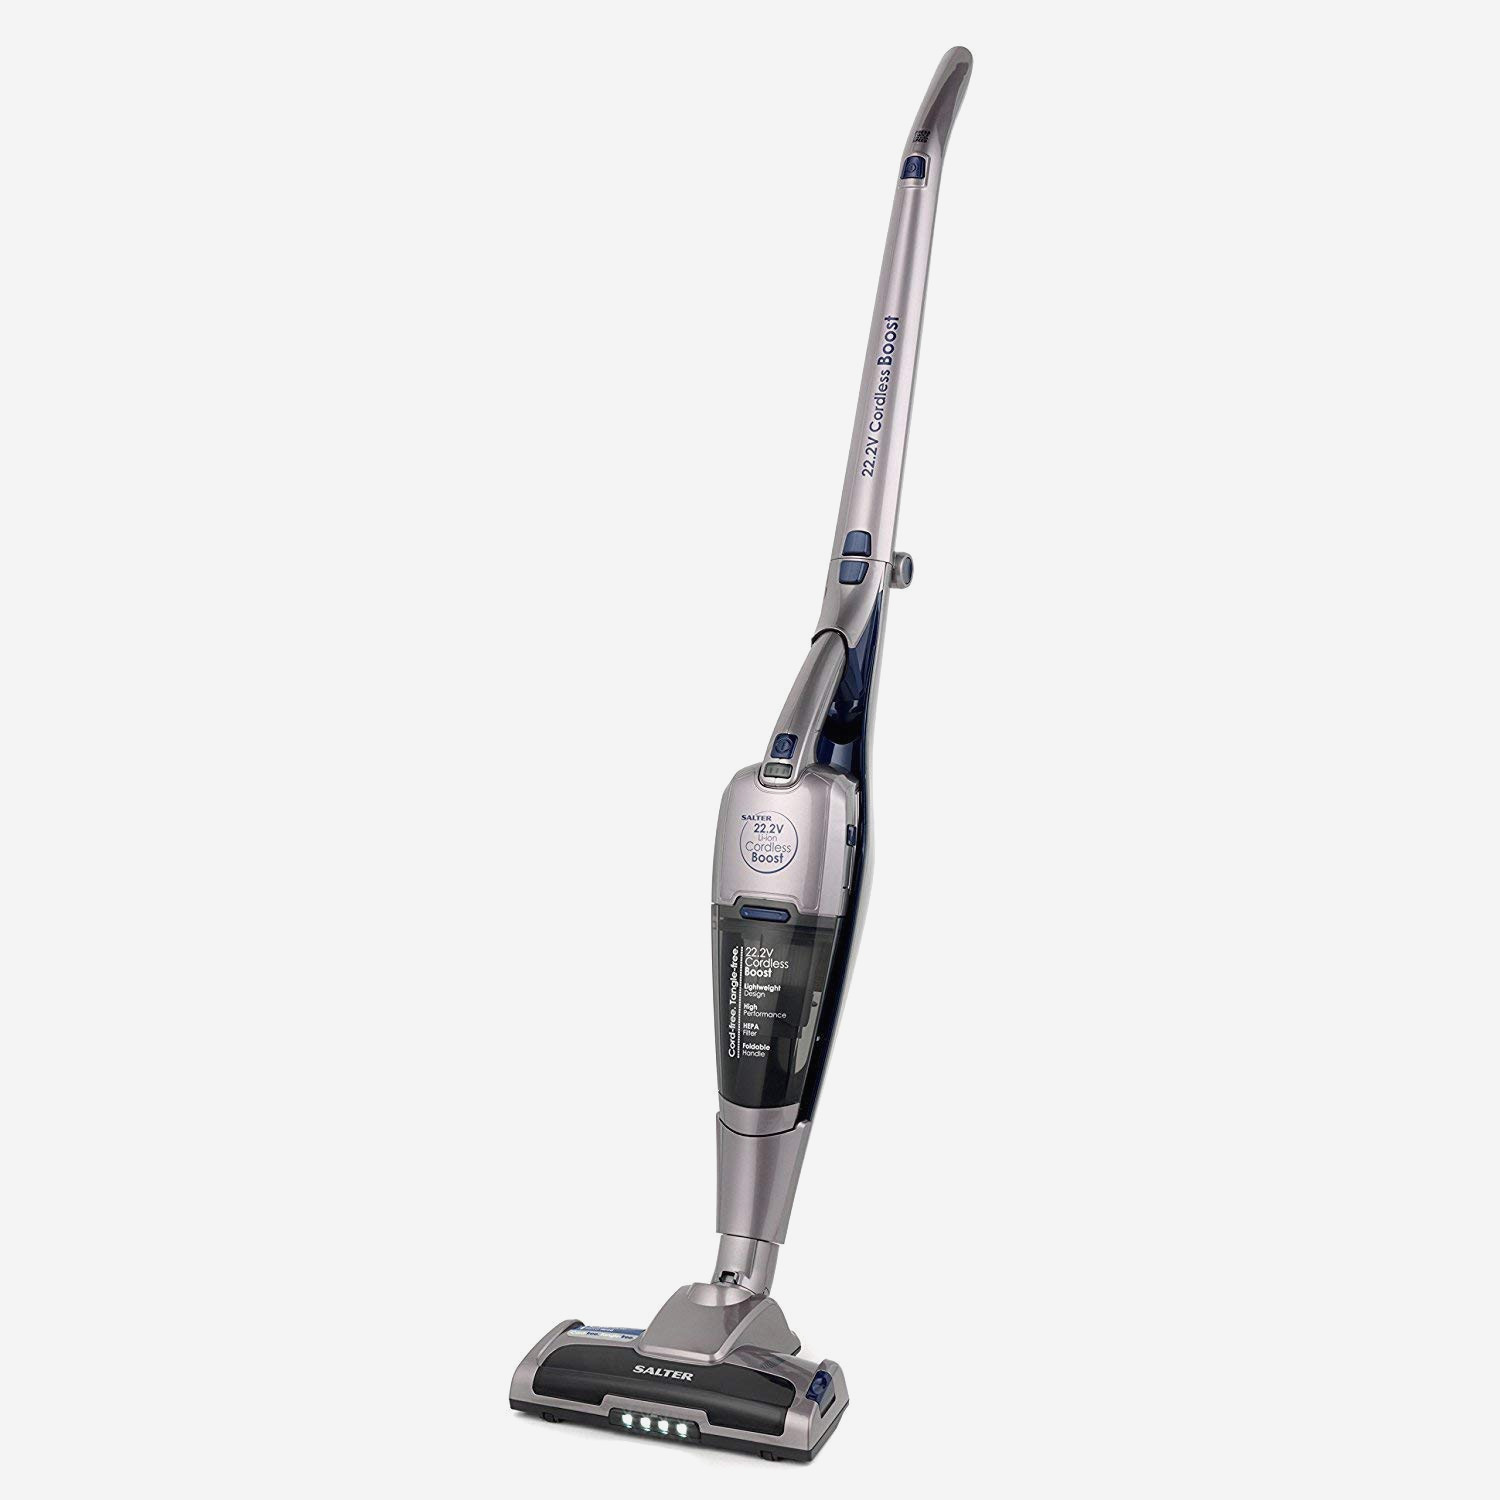 20 Perfect Vacuum with Hardwood Floor attachment 2024 free download vacuum with hardwood floor attachment of dyson vacuum hardwood floor attachment tourespo com inside new dyson vacuum hardwood floor attachment cool home design fancy at design tips of dyson 